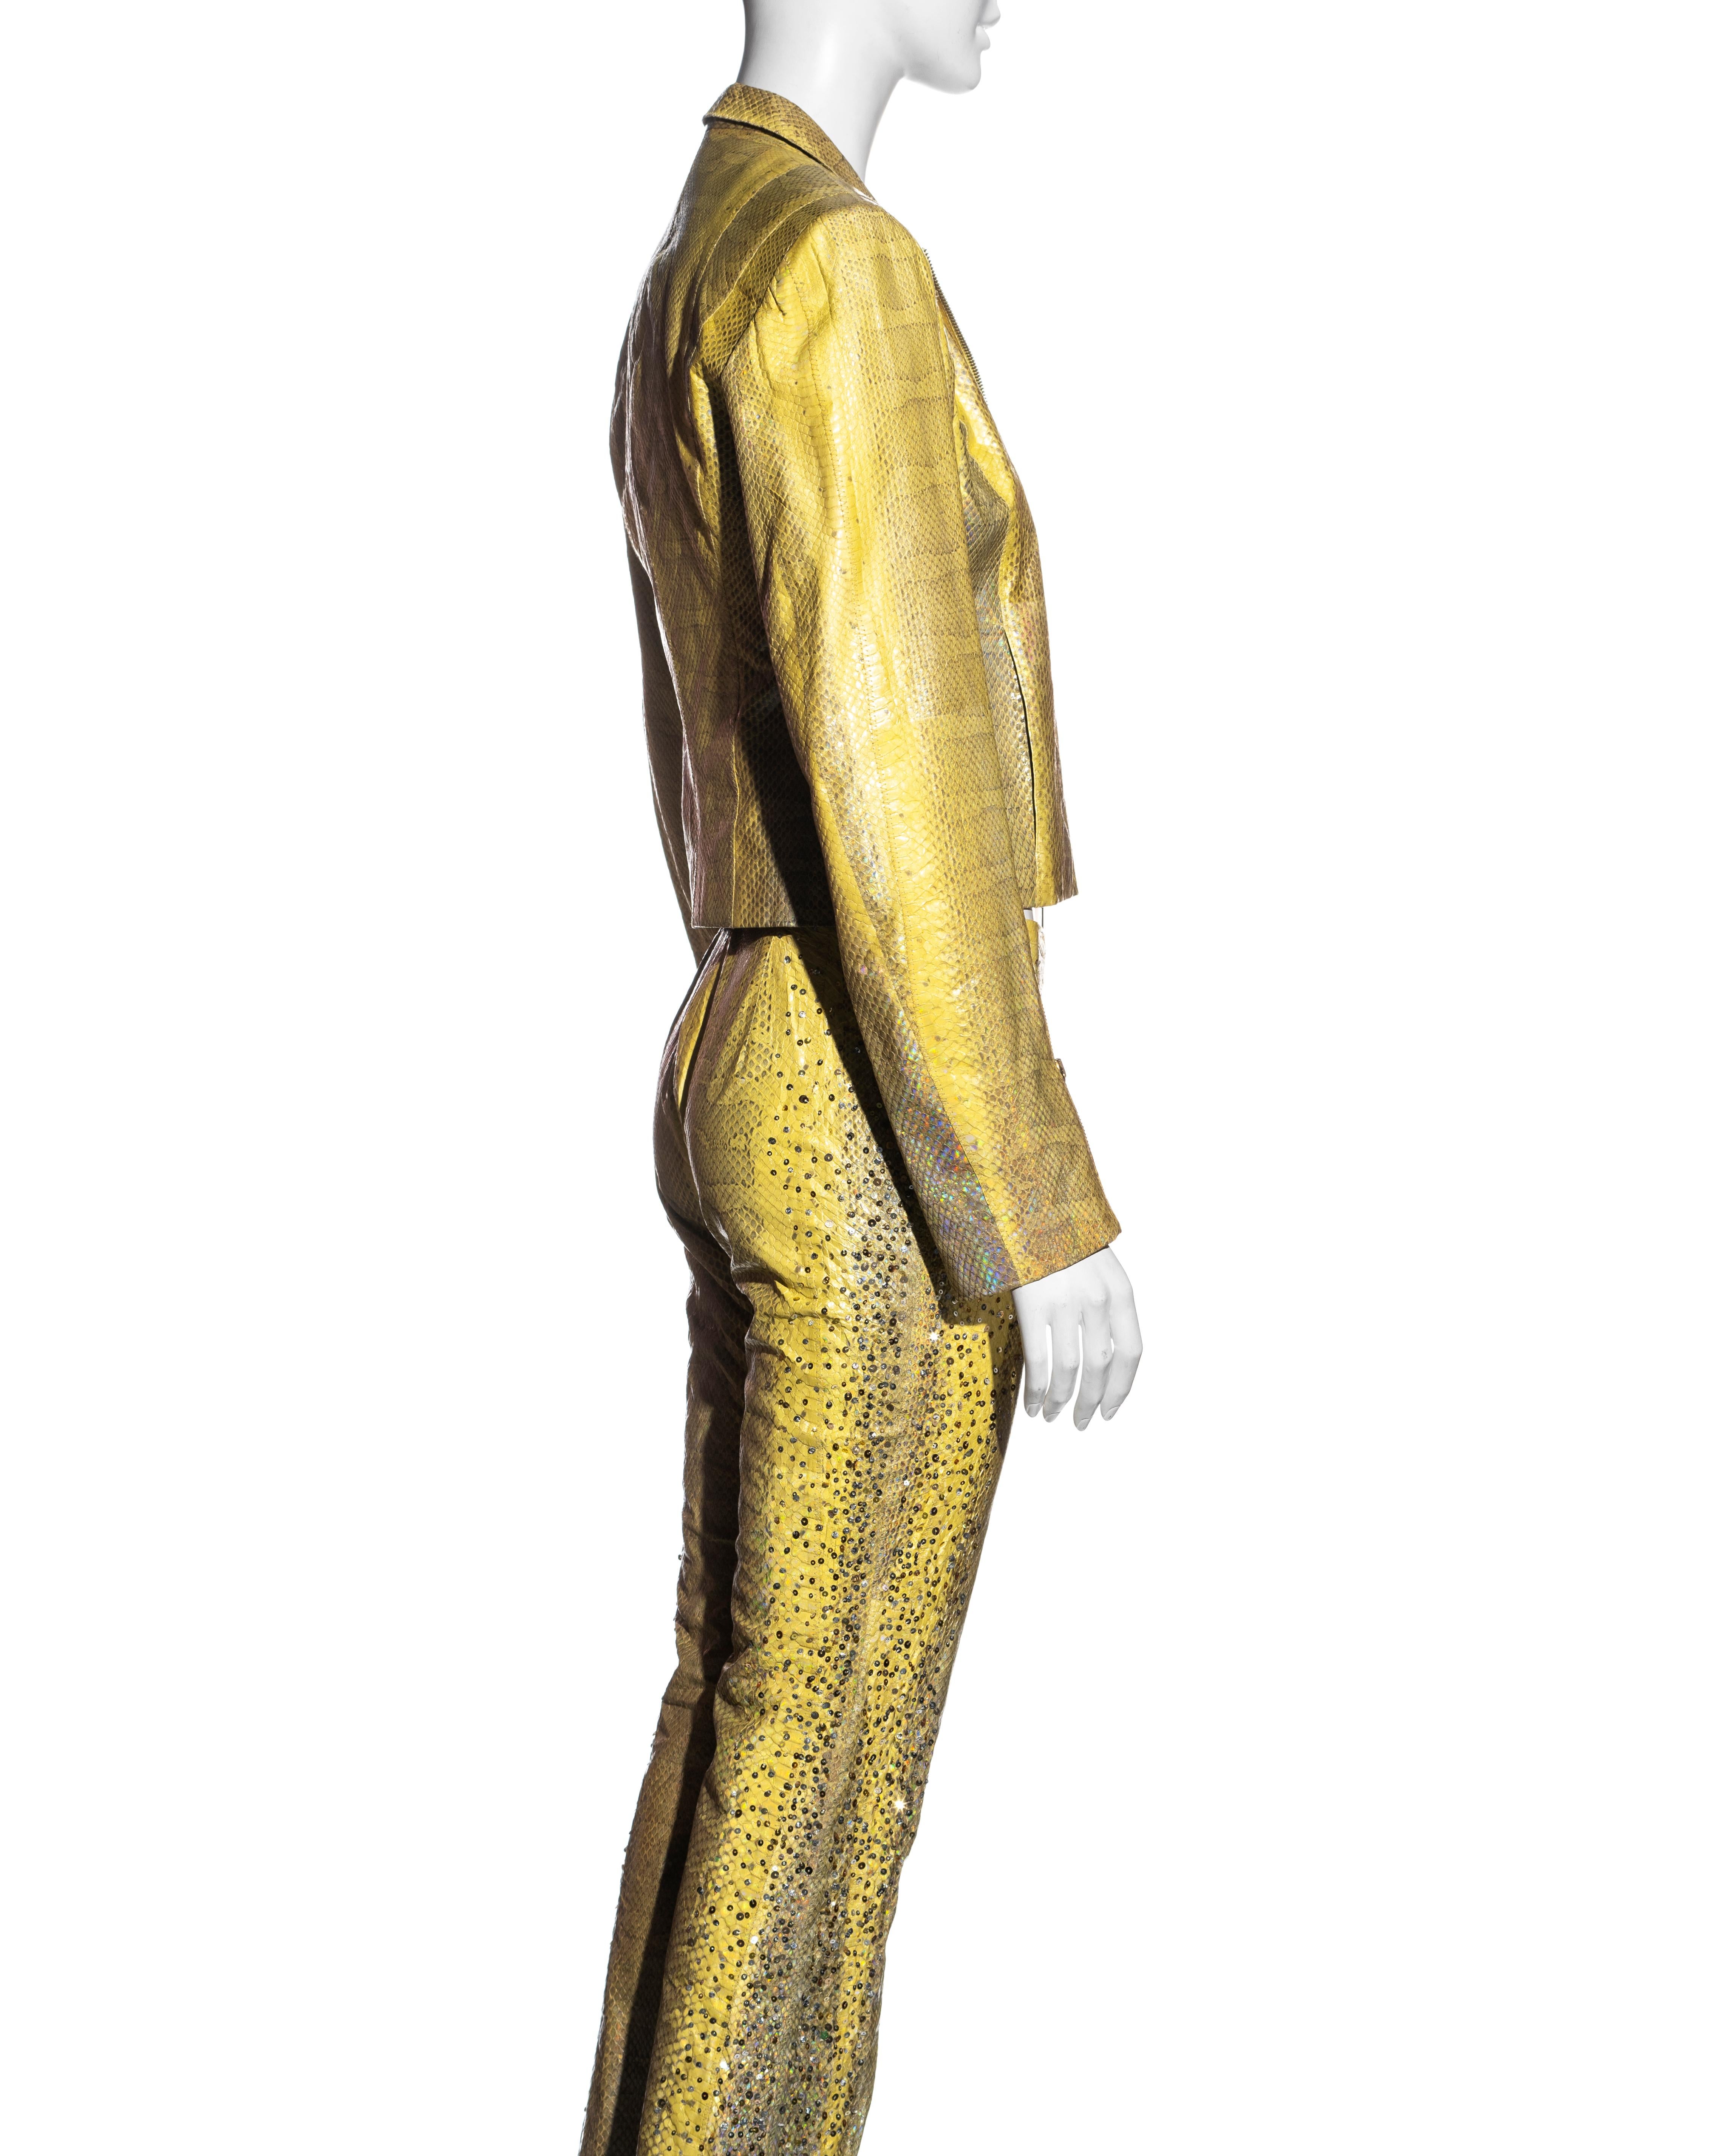 Roberto Cavalli yellow iridescent snakeskin pant suit with sequins, ss 2001 For Sale 2